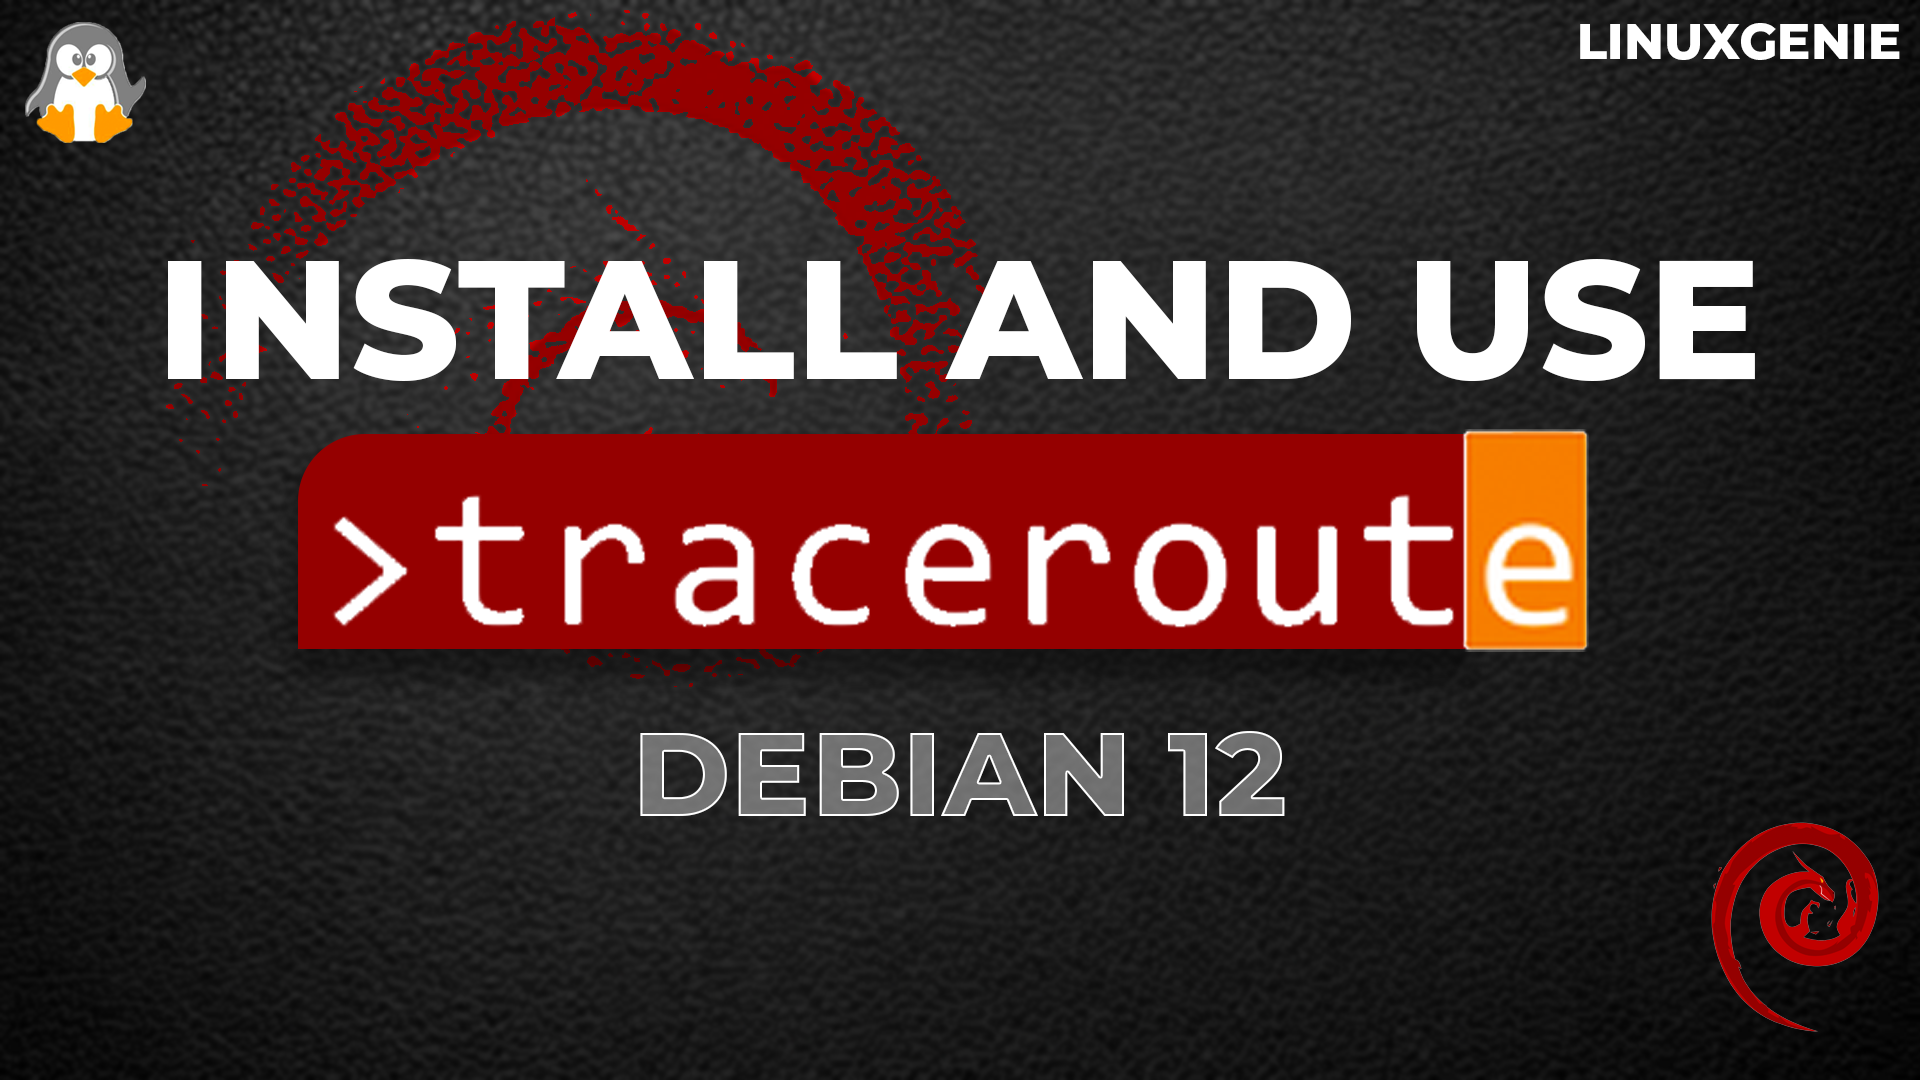 How to Install and Use Traceroute on Debian 12?